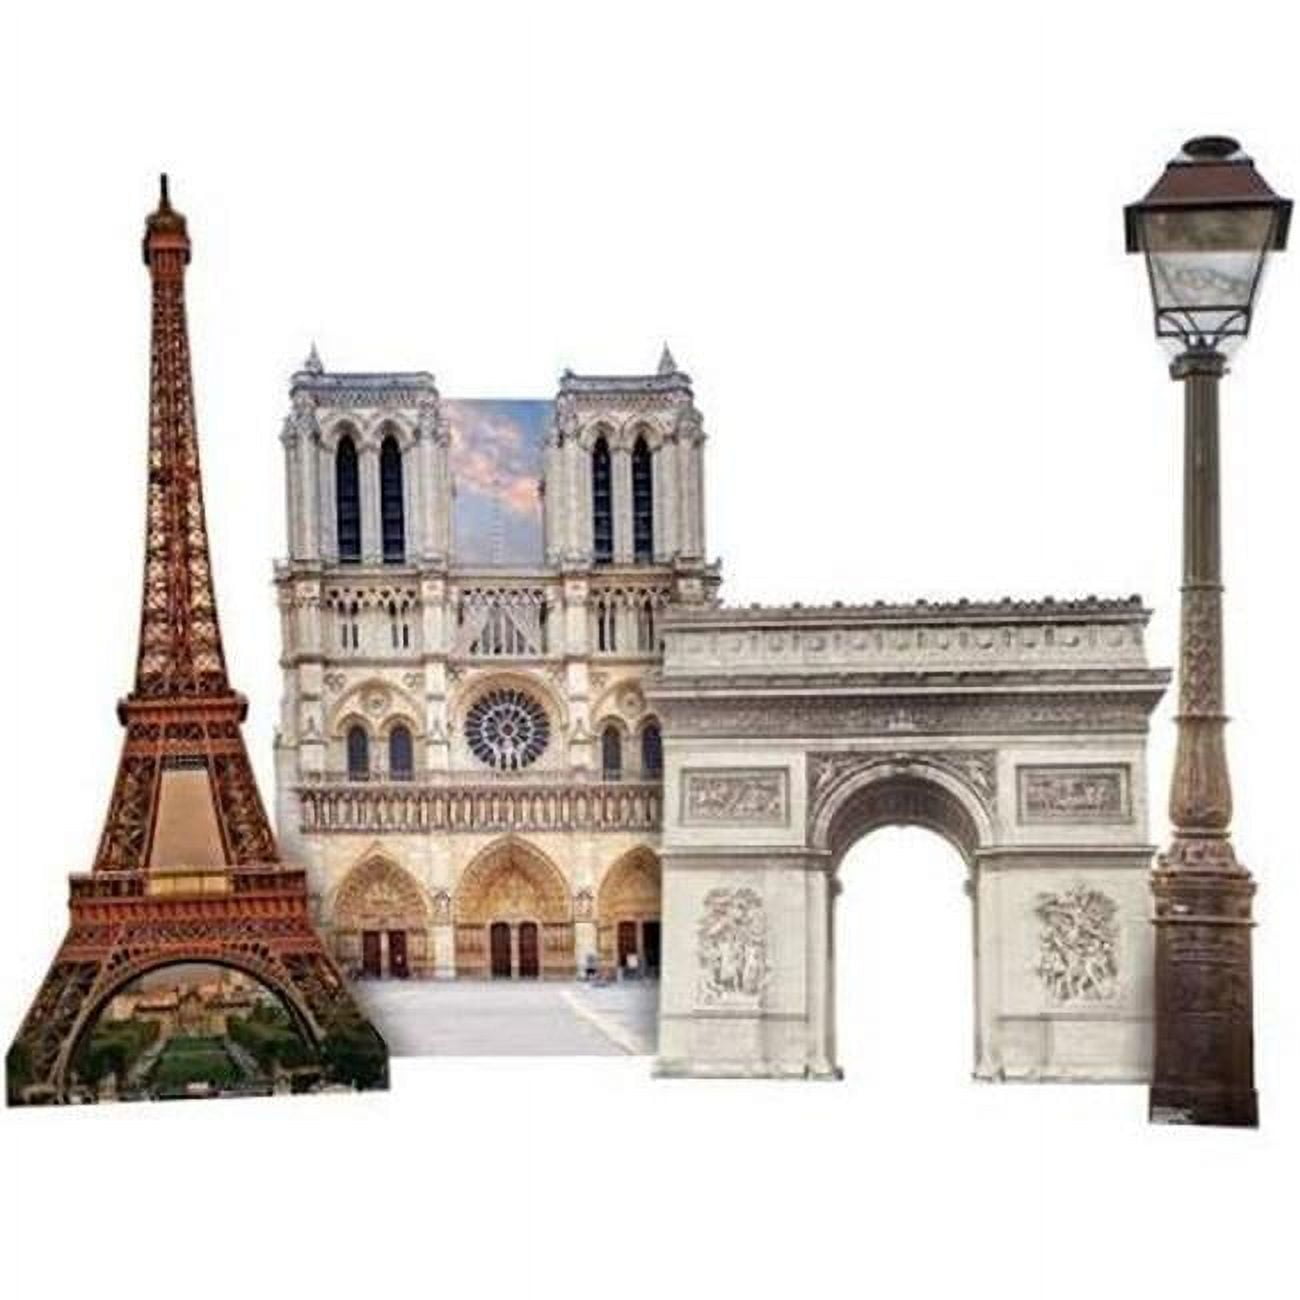 Picture of Advanced Graphics 2697 24 x 36 in. Paris Landmark Party - Set of 2